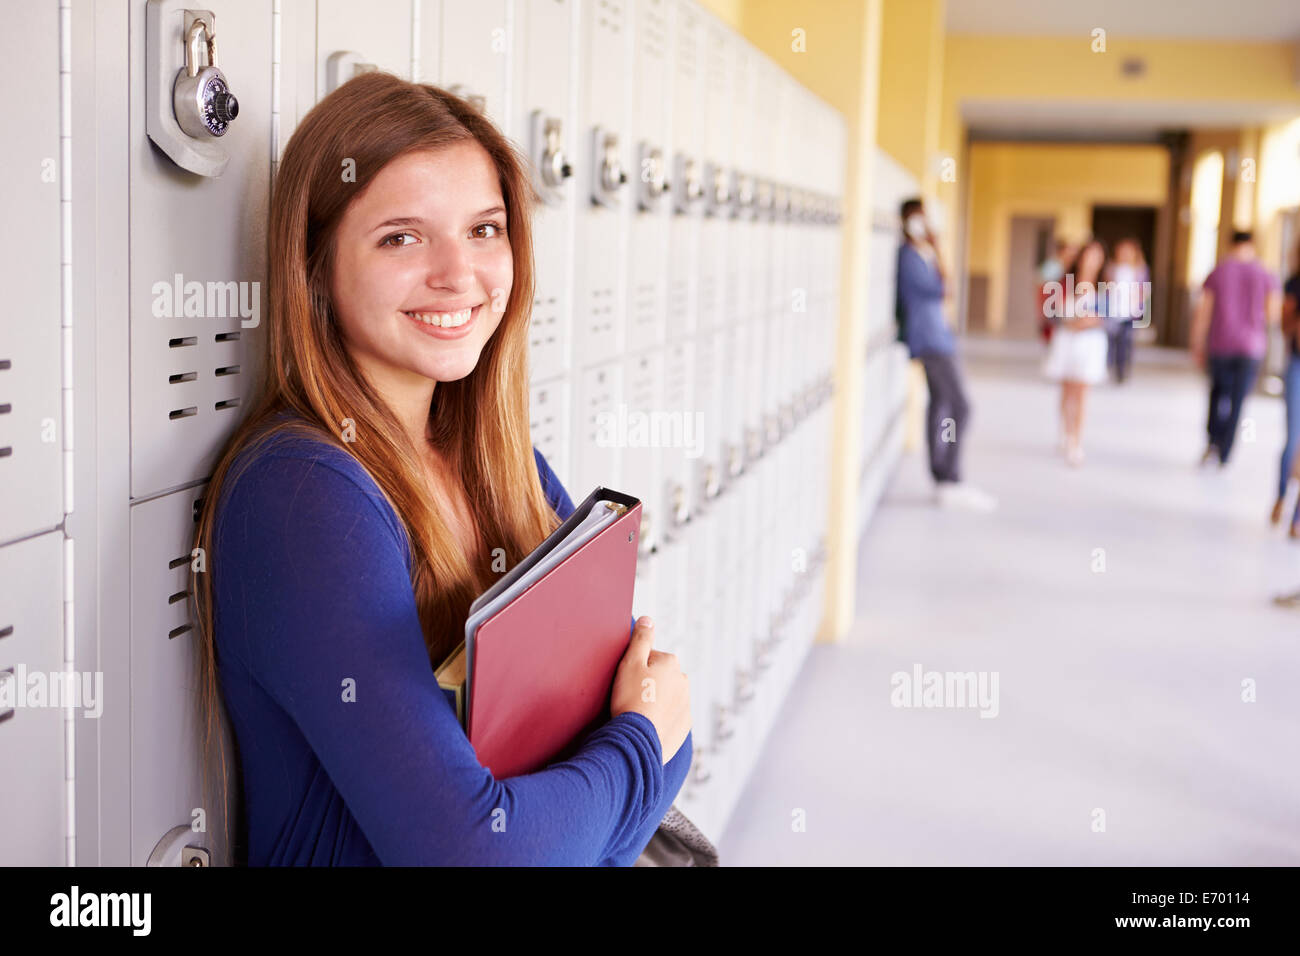 Female High School Student Standing By Lockers Stock Photo